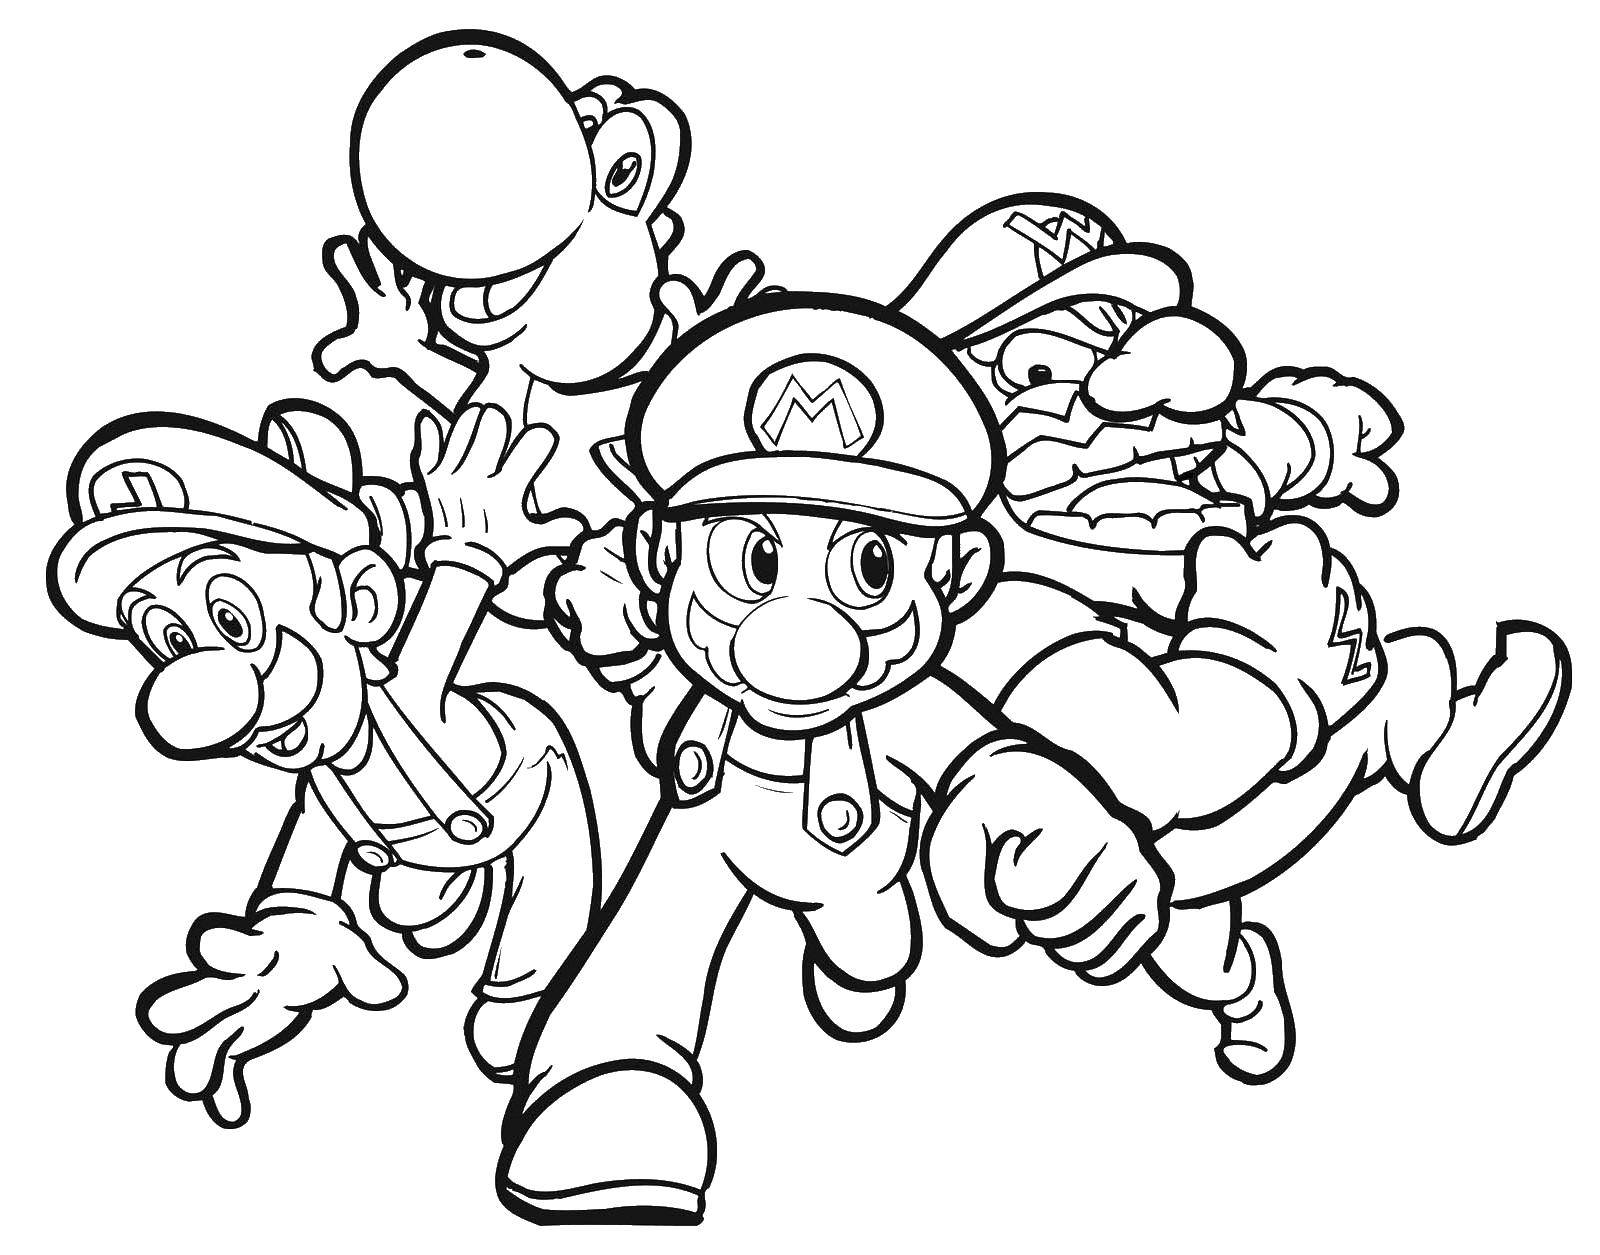 Coloring Mario. Category The character from the game. Tags:  games, console, Mario.